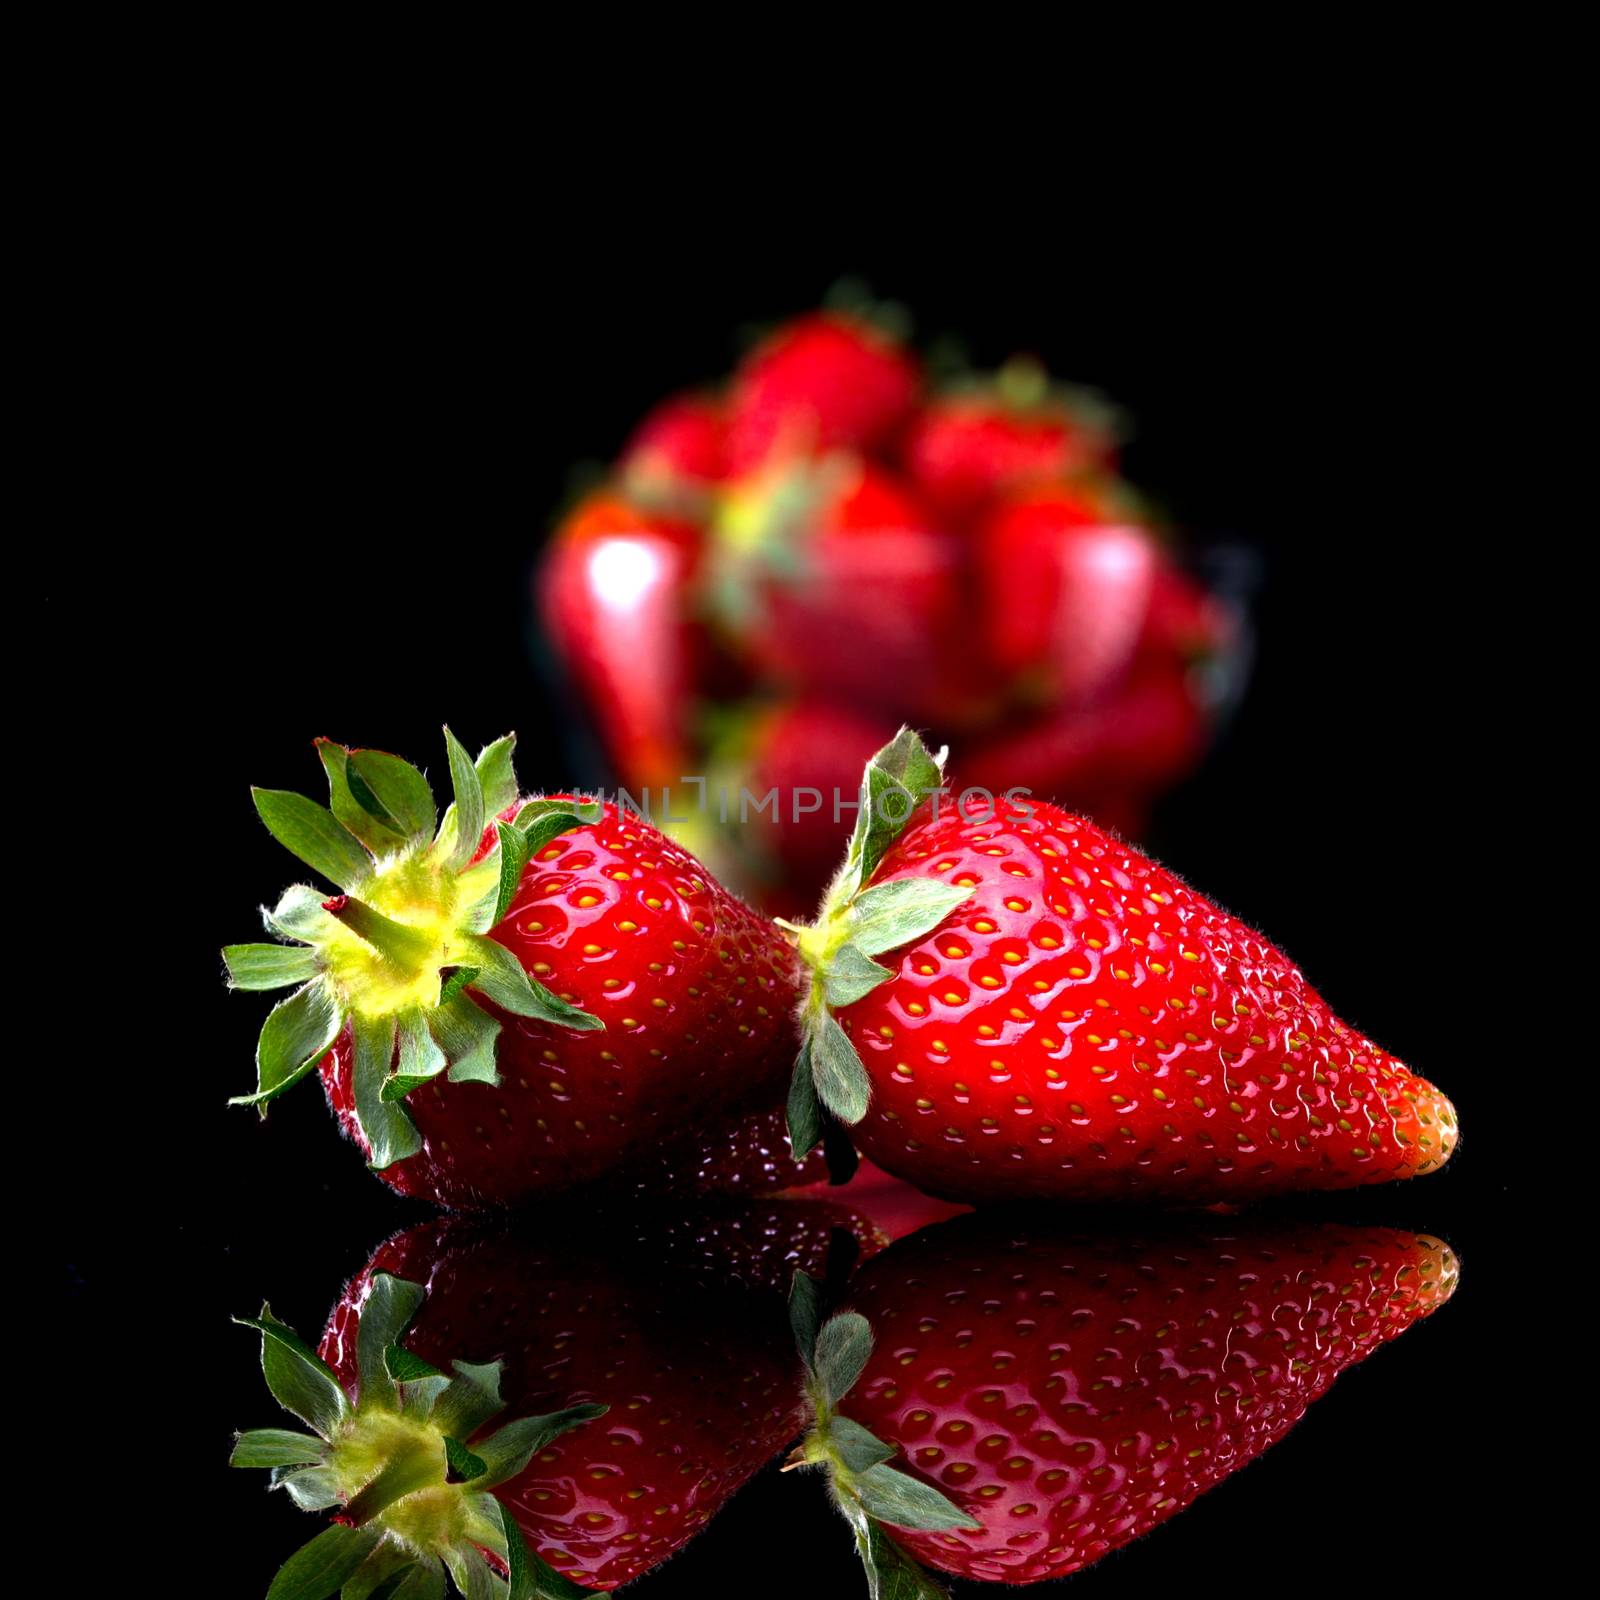 Delicious strawberries by stokkete